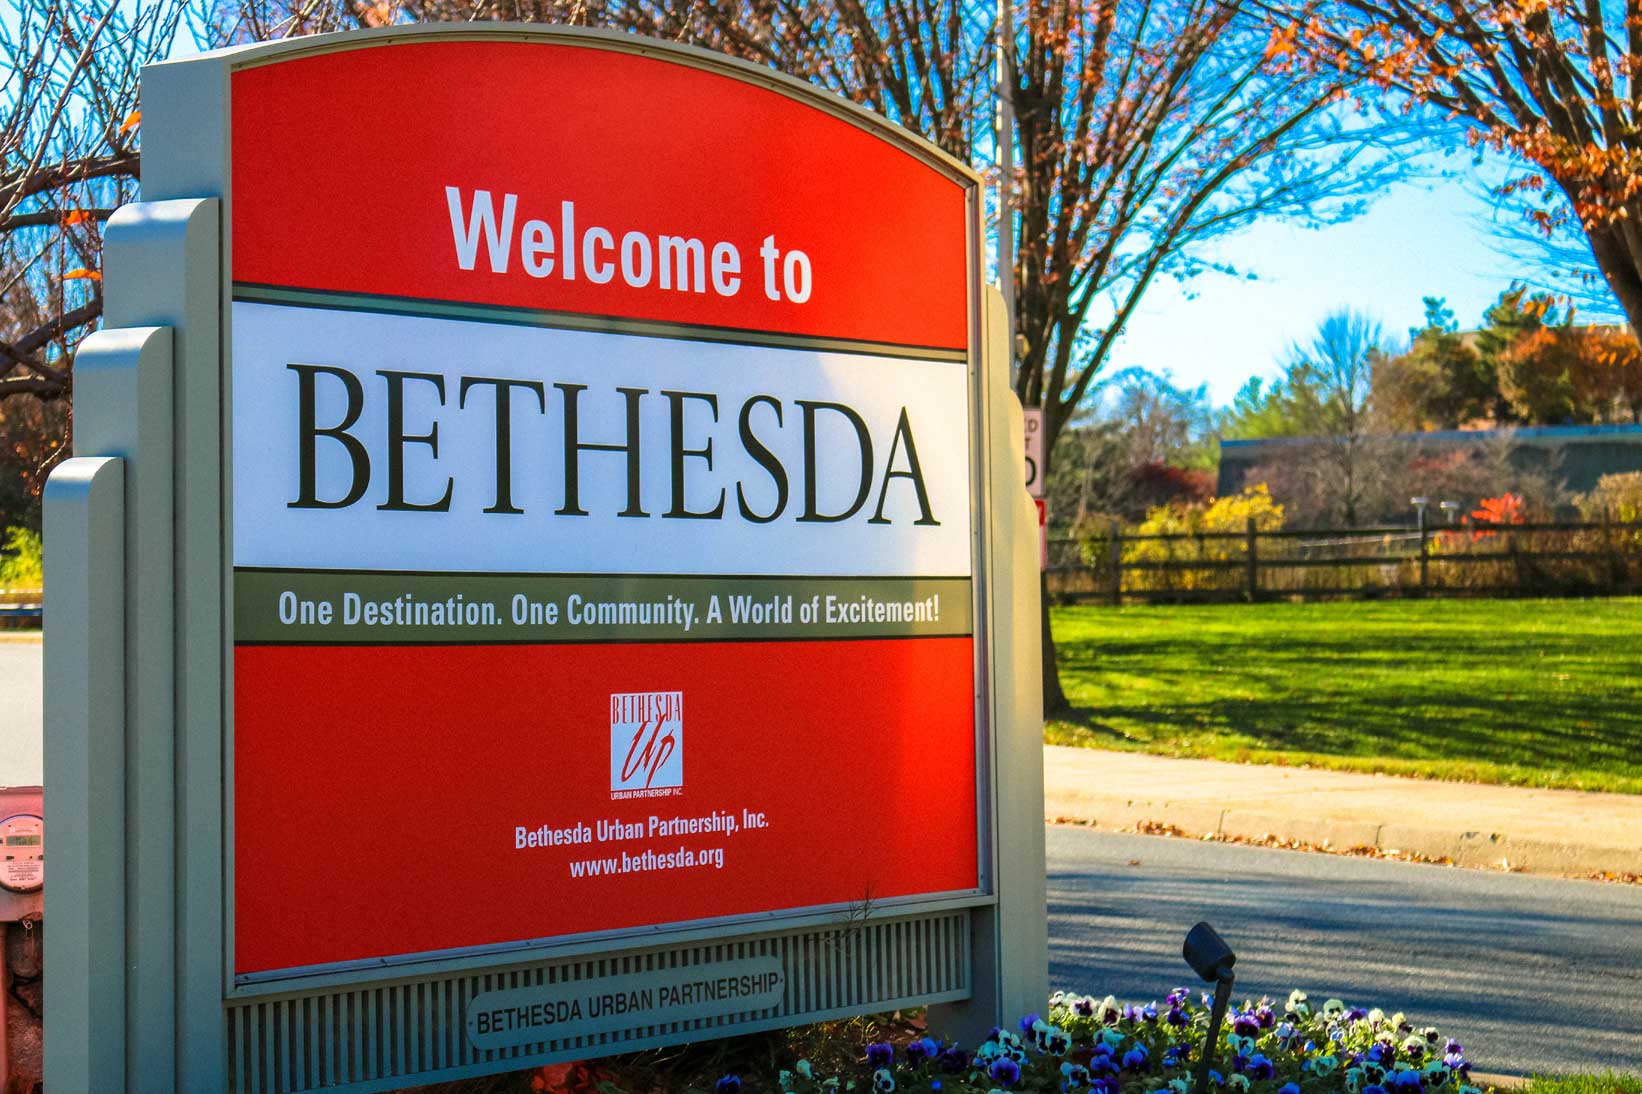 Welcome to bethesda sign in Bethesda, MD